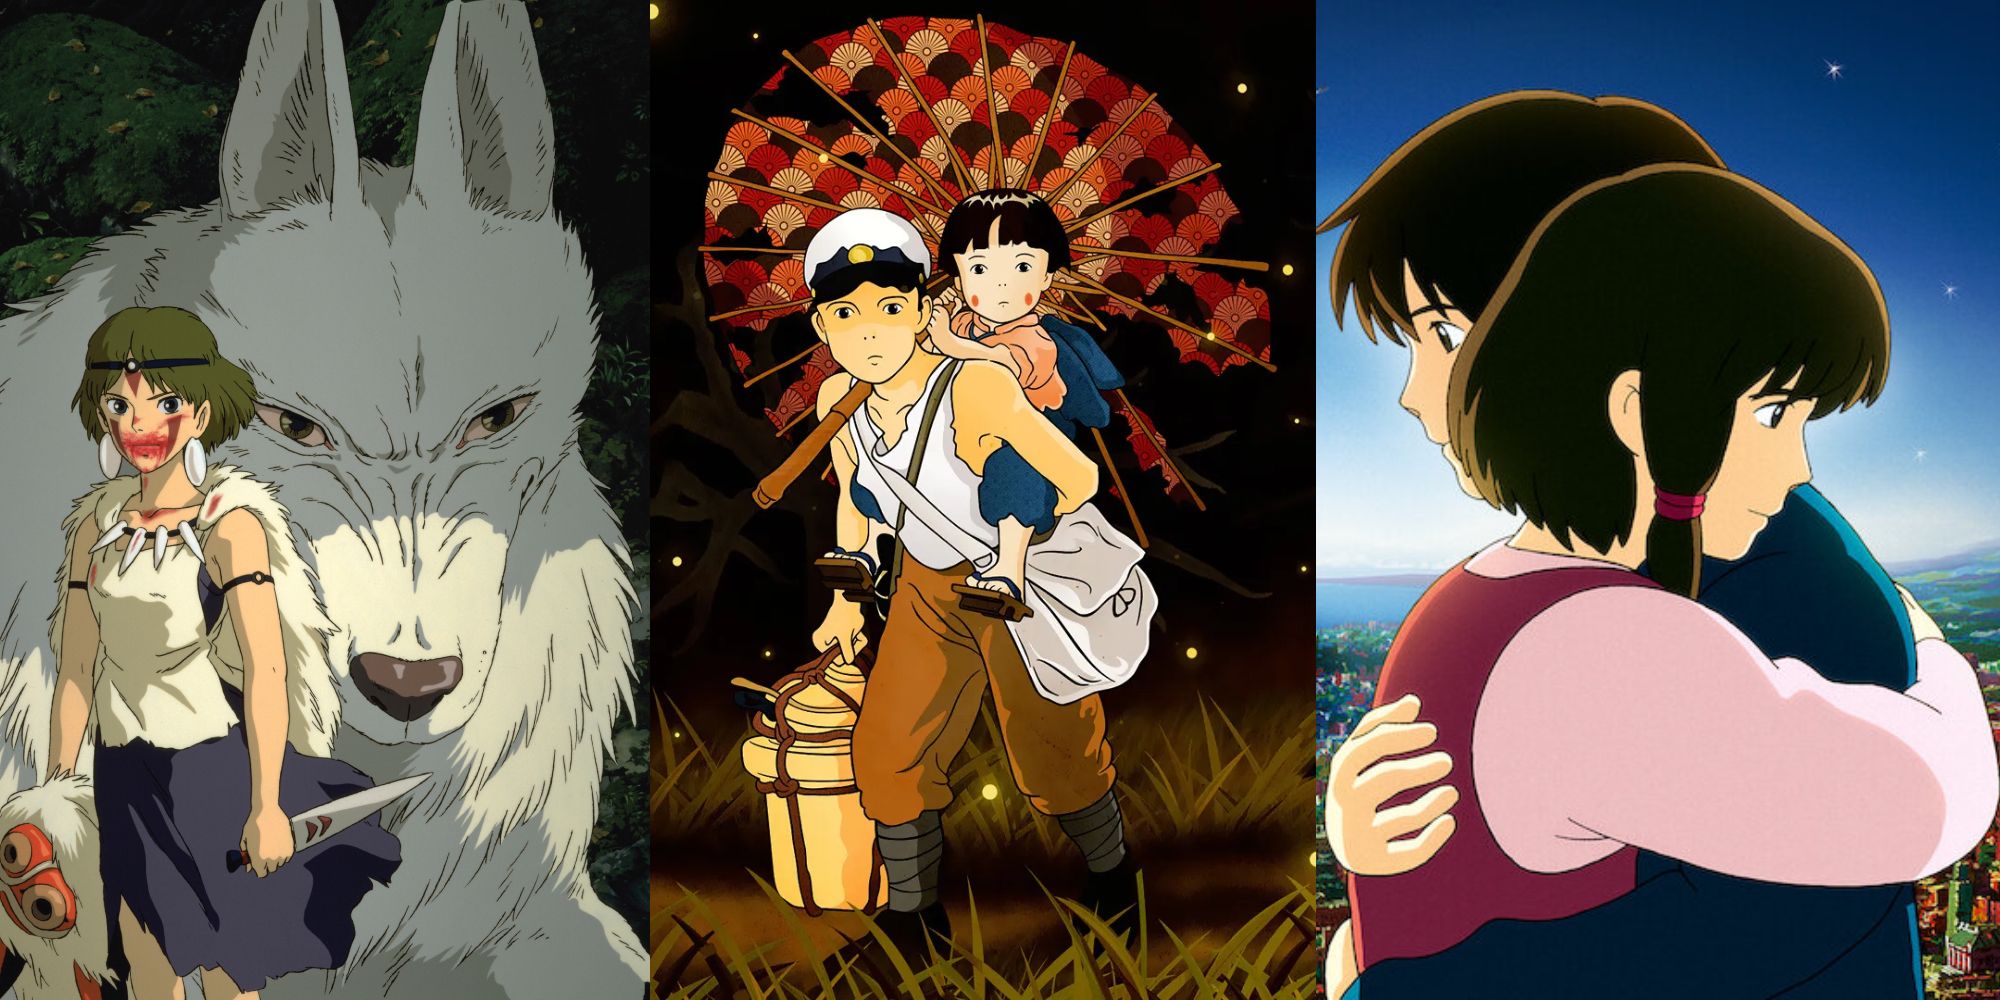 Split images featuring Princess Mononoke, Grave of the Fireflies and Tales from Earthsea